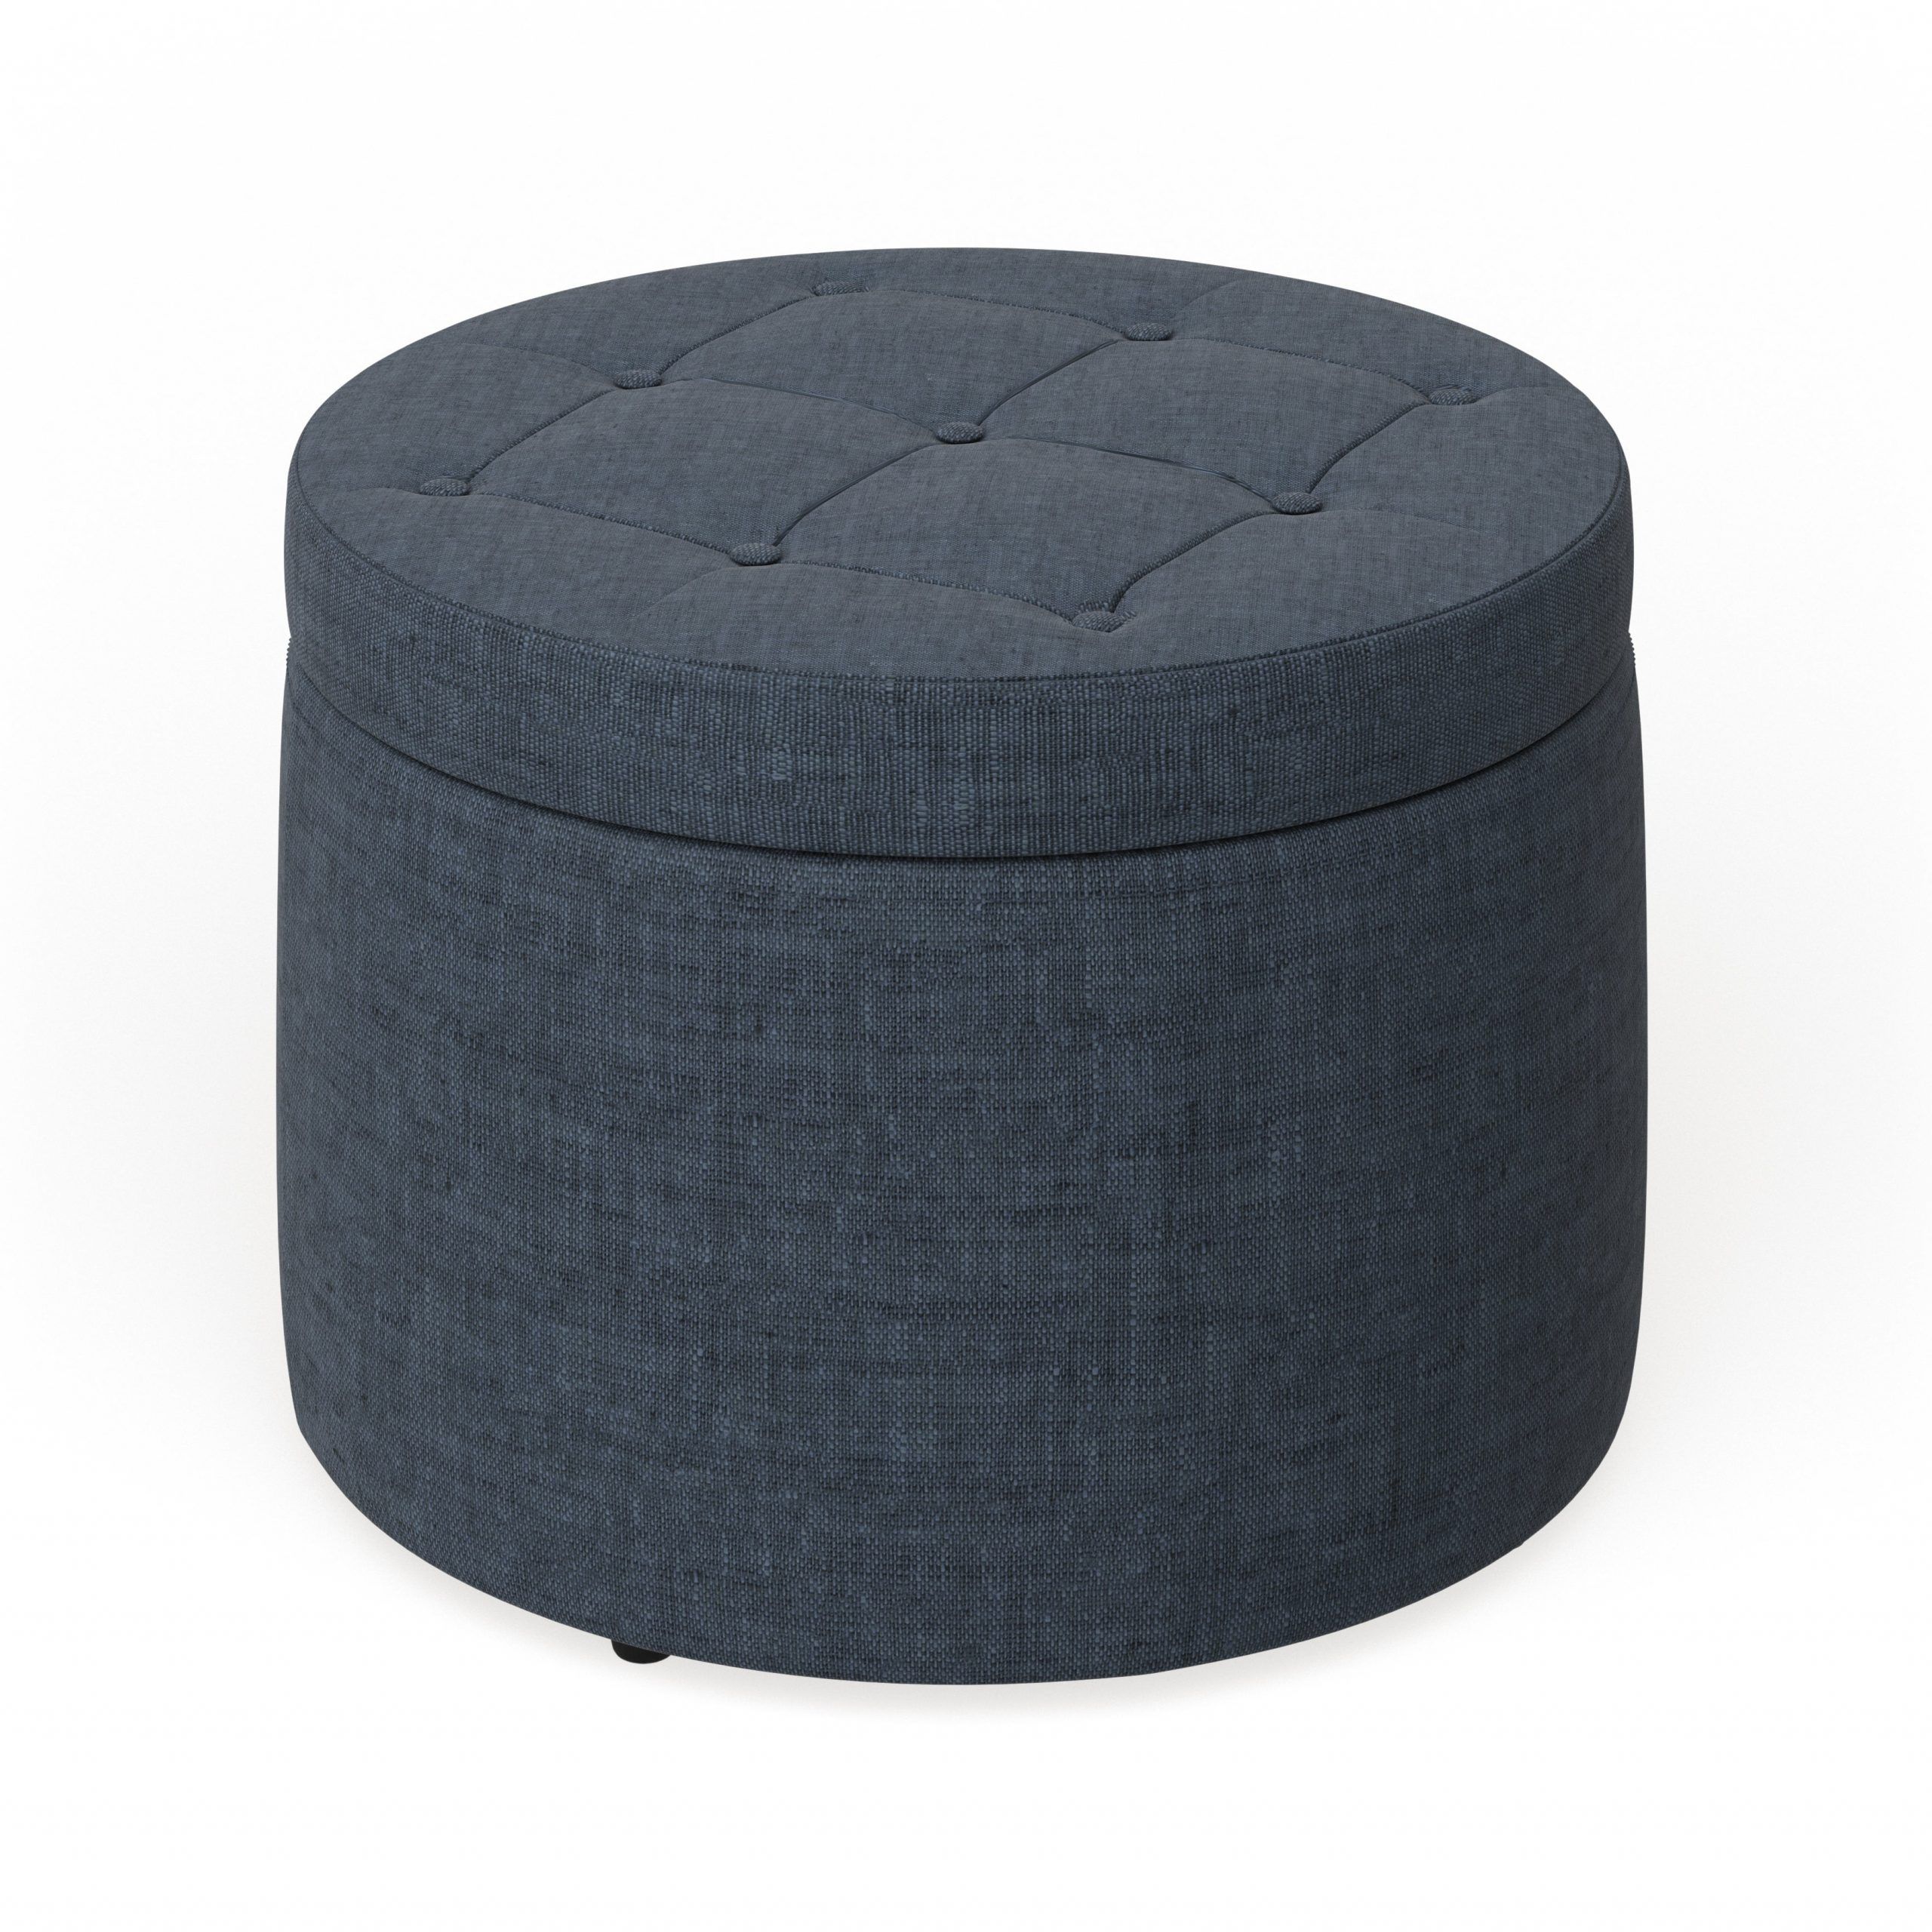 [%porch & Den Deslonde Round Shoe Storage Ottoman [18036358] – $38.99 Intended For Favorite Round Gray Faux Leather Ottomans With Pull Tab|round Gray Faux Leather Ottomans With Pull Tab Pertaining To Preferred Porch & Den Deslonde Round Shoe Storage Ottoman [18036358] – $38.99|latest Round Gray Faux Leather Ottomans With Pull Tab In Porch & Den Deslonde Round Shoe Storage Ottoman [18036358] – $38.99|most Popular Porch & Den Deslonde Round Shoe Storage Ottoman [18036358] – $ (View 4 of 10)